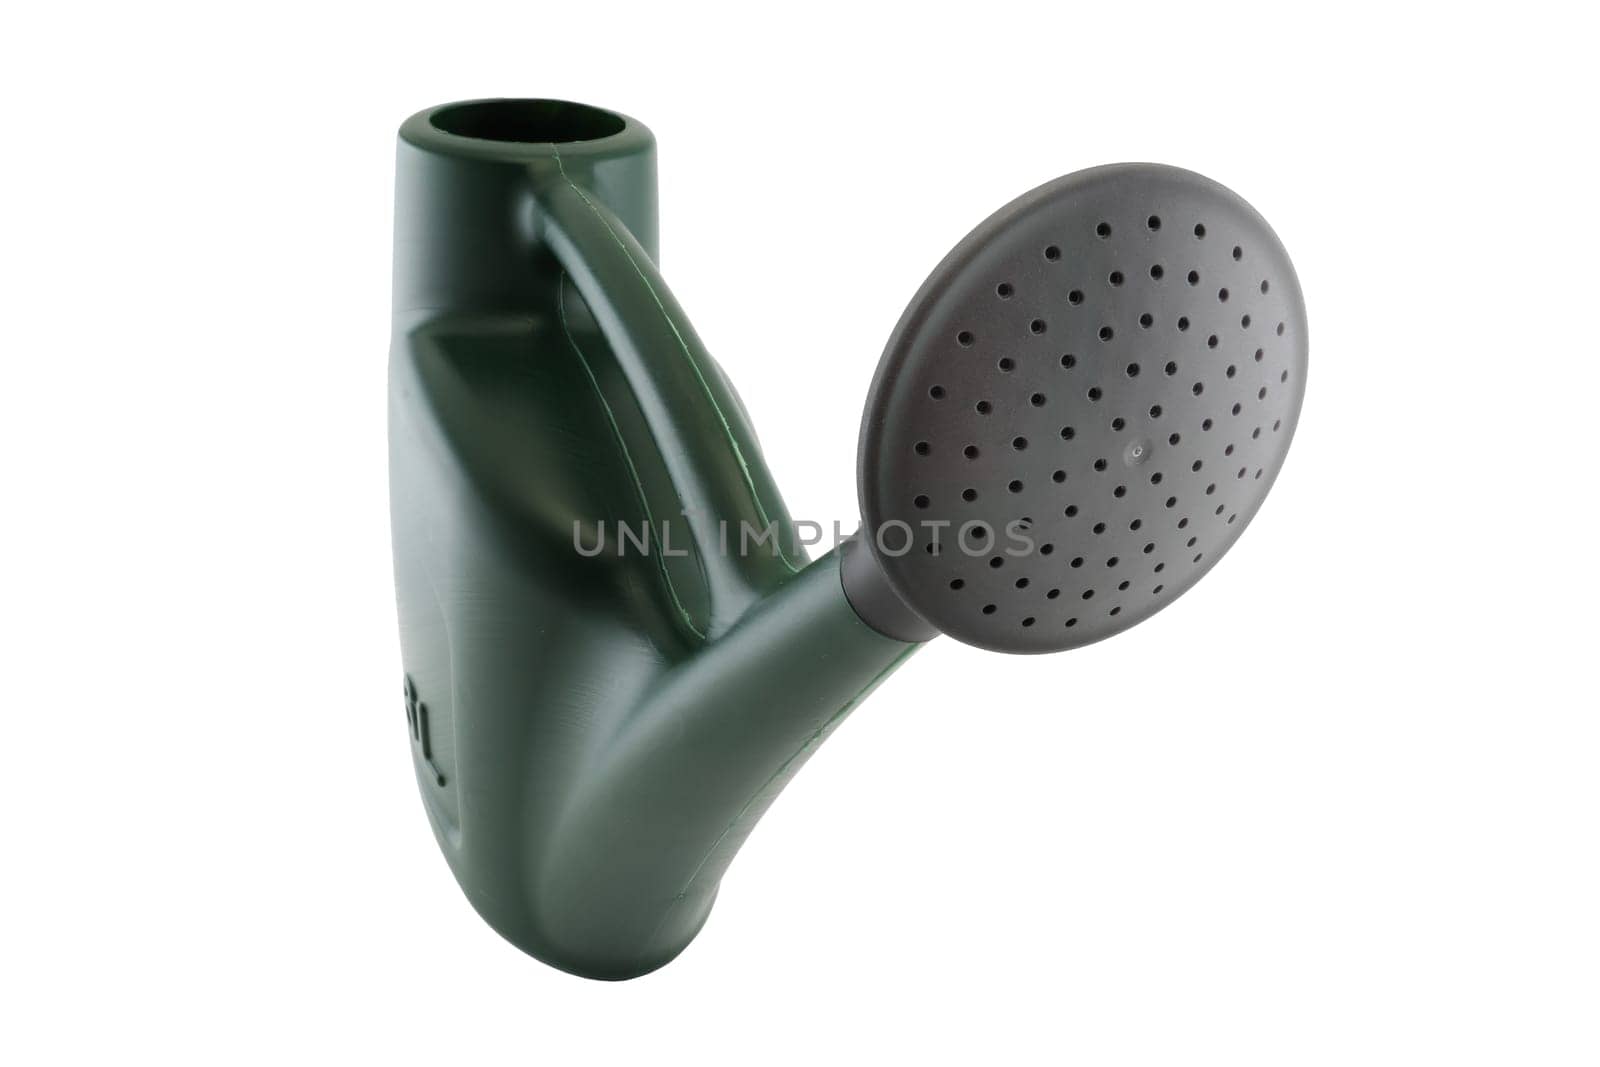 Green garden watering can with clipping path by VivacityImages